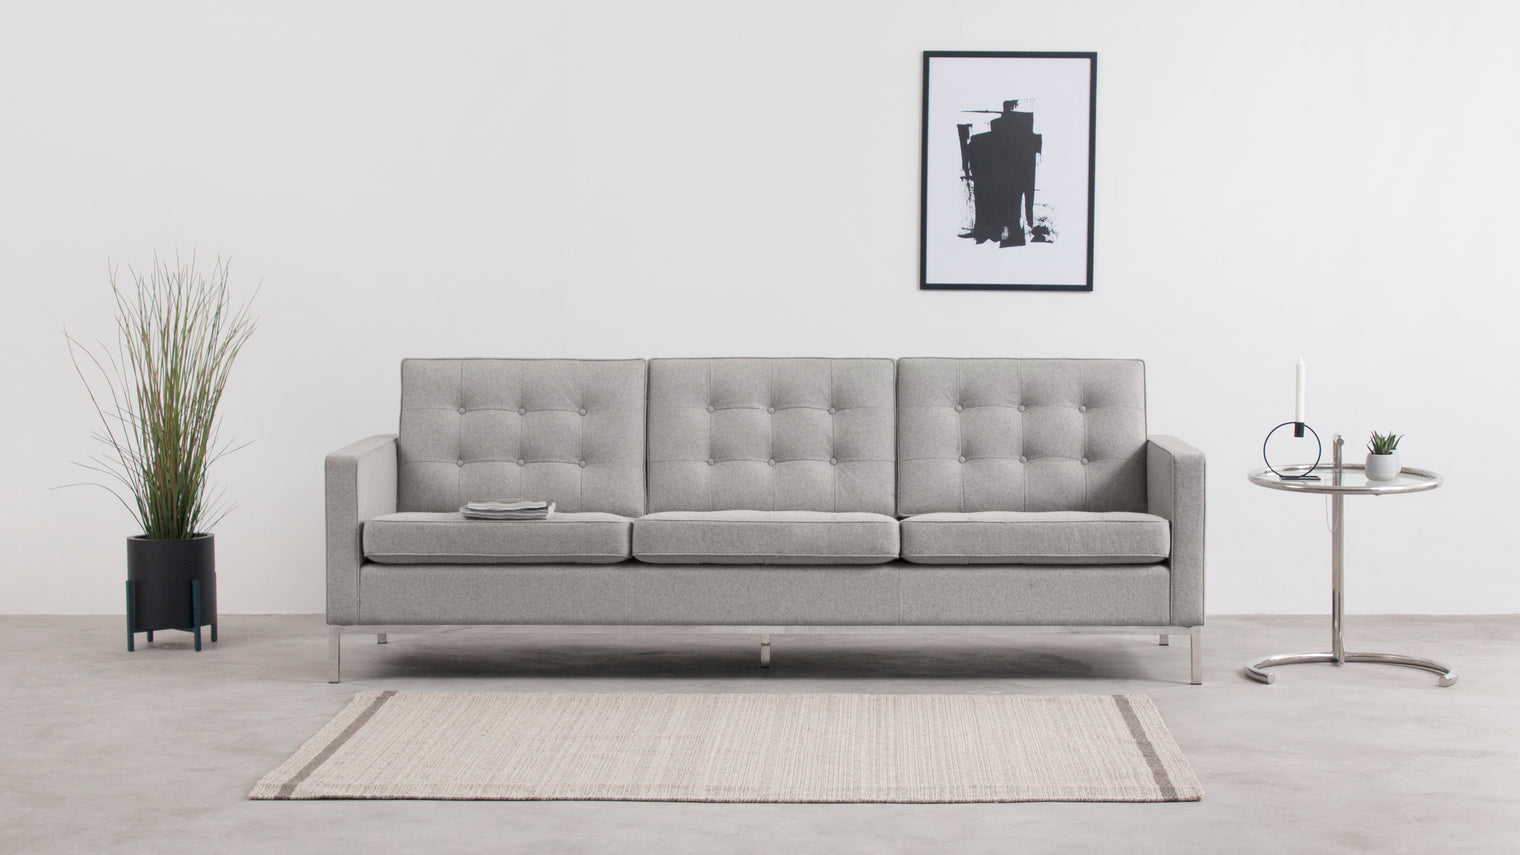 Effortless elegance|Sleek, sophisticated and stylish enough to elevate any space it graces, our Florence Three-Seater Sofa adds elegance and charm to the style-conscious home or business.
